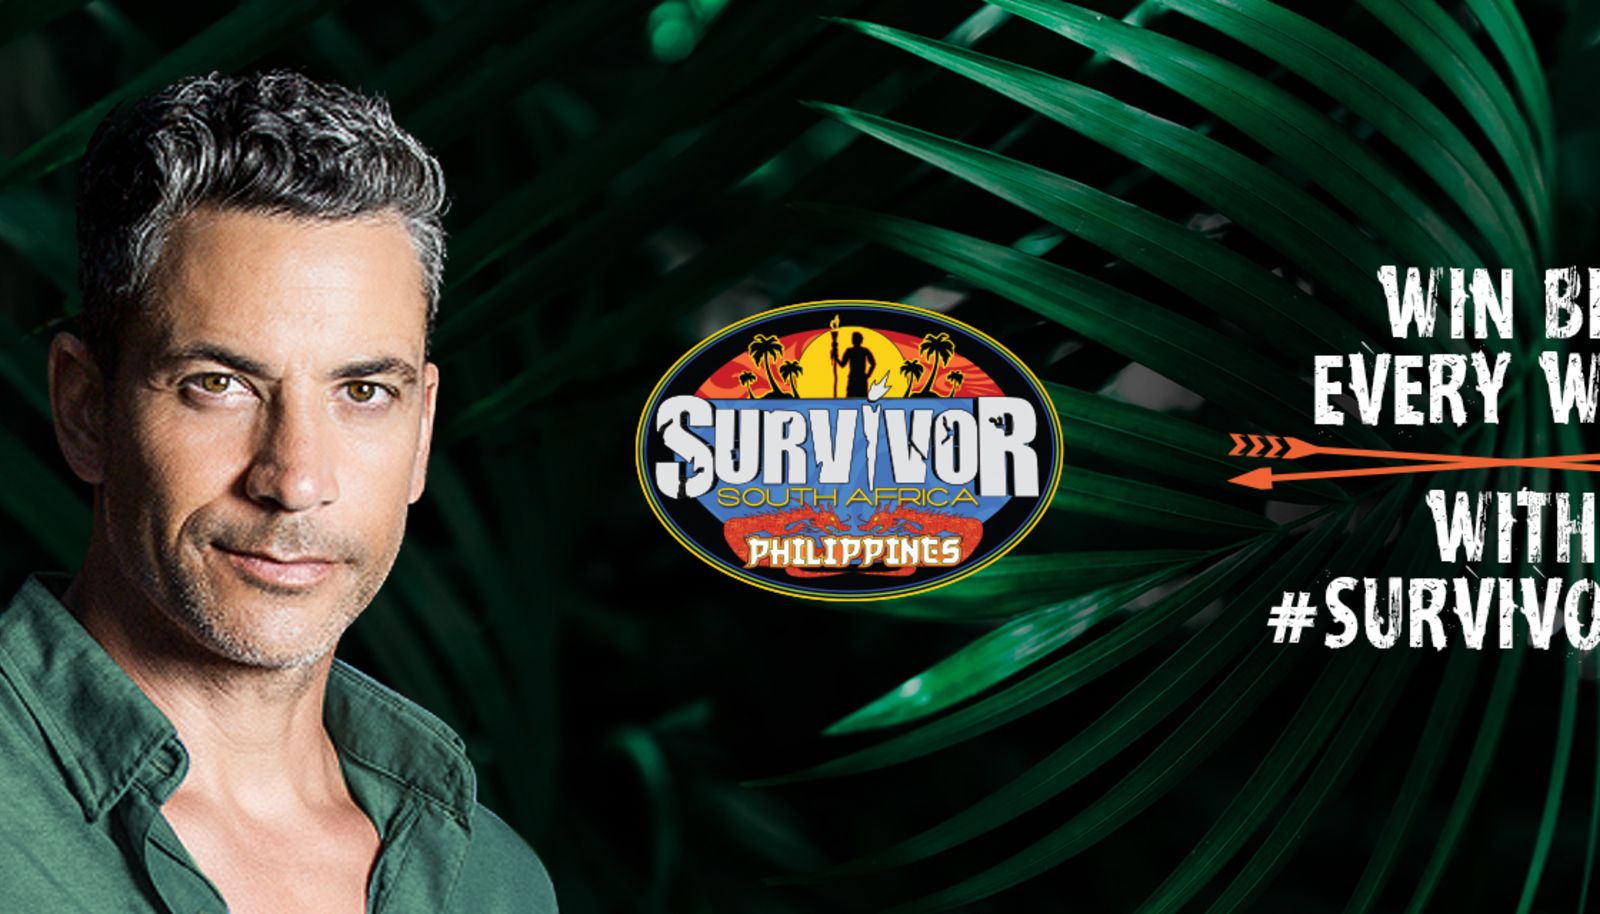 M-Net - All the ways you can win with #SurvivorSA